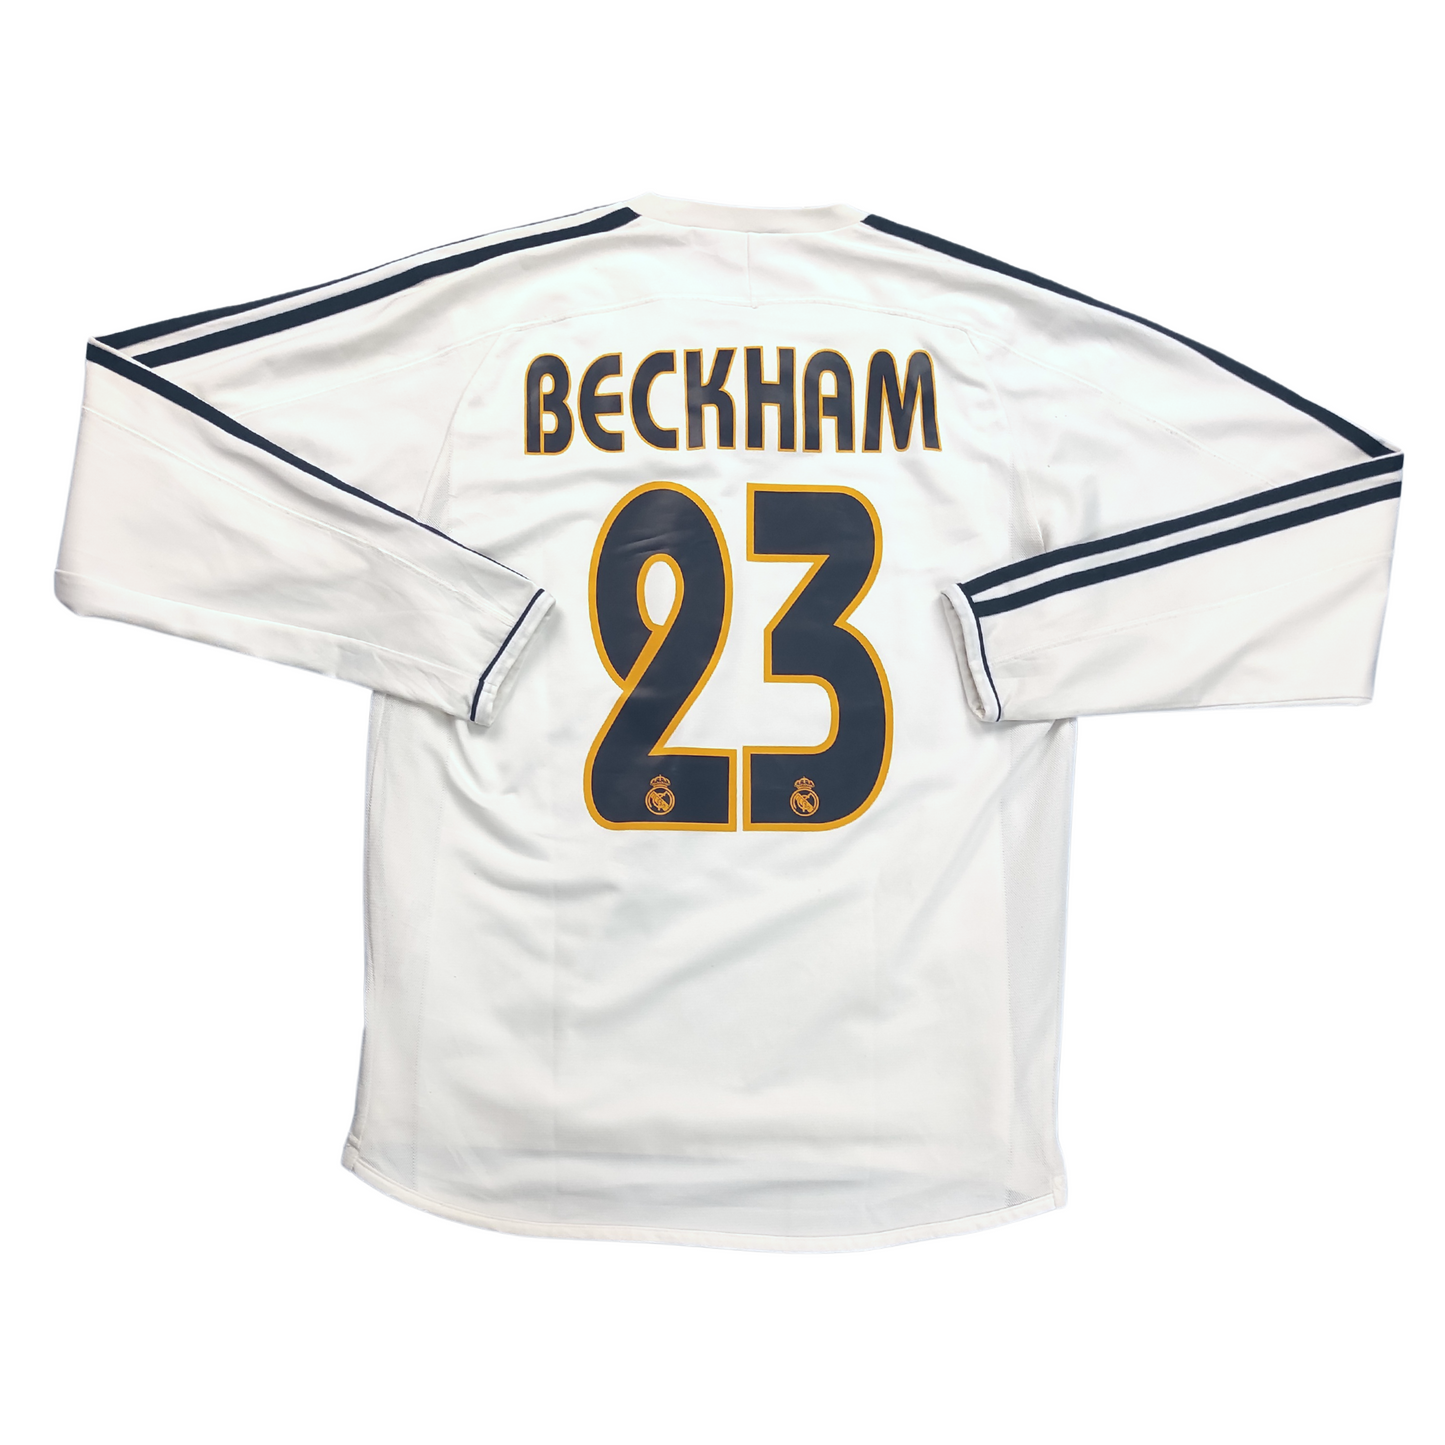 Real Madrid Home L/S Player Issue Shirt 2003-2004 Beckham (S)